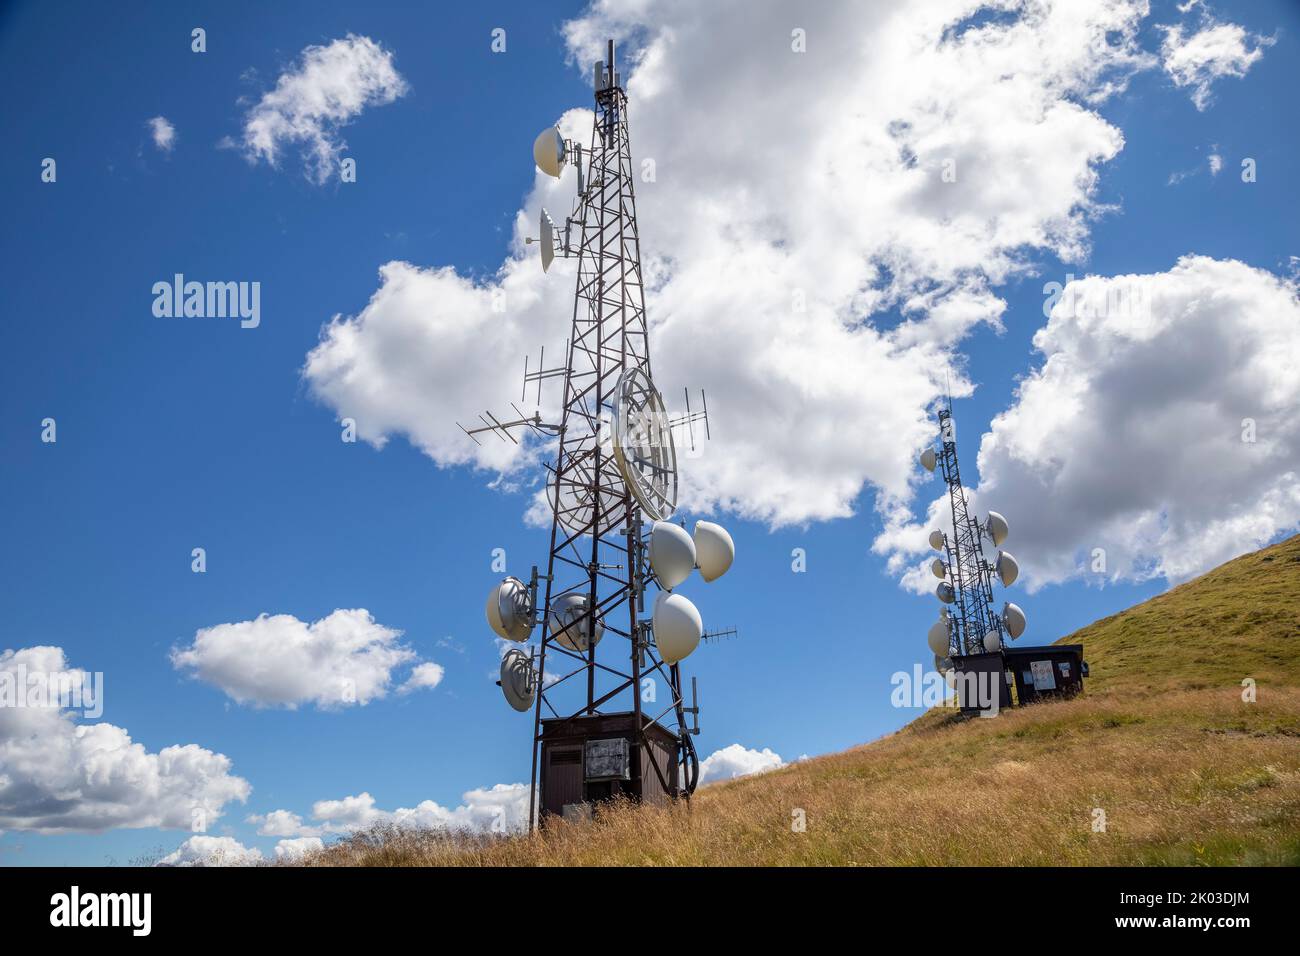 Italy, Trentino, province of Trento, Predazzo, Dos Capel. tower with antennas and parables for radio and telecommunications Stock Photo